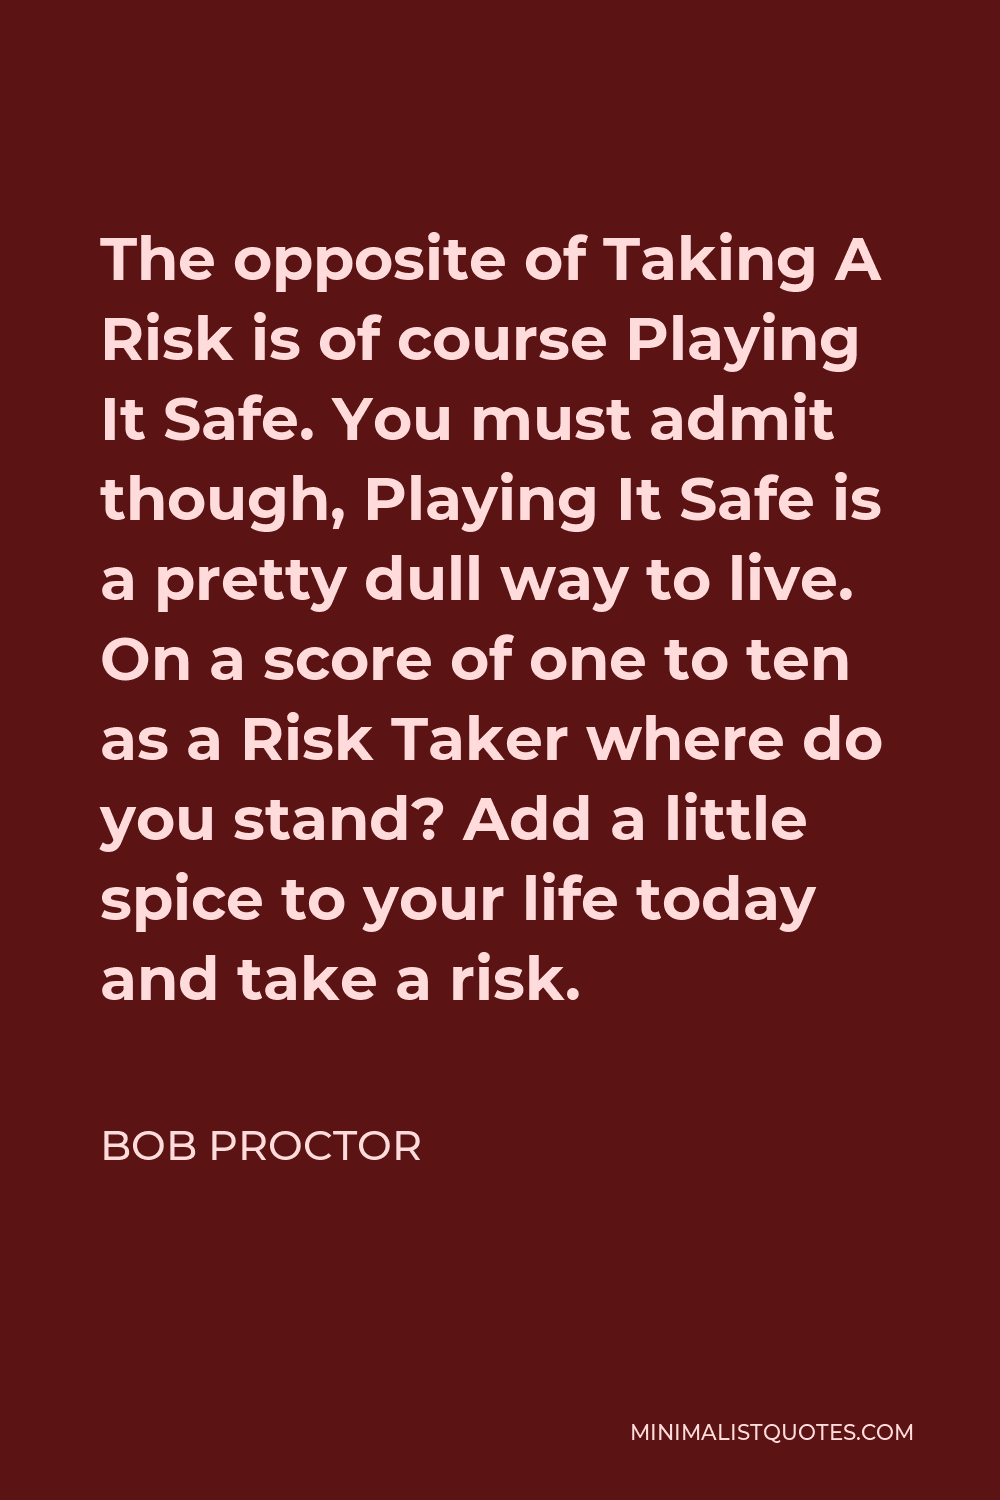 Bob Proctor Quote - The opposite of Taking A Risk is of course Playing It Safe. You must admit though, Playing It Safe is a pretty dull way to live. On a score of one to ten as a Risk Taker where do you stand? Add a little spice to your life today and take a risk.